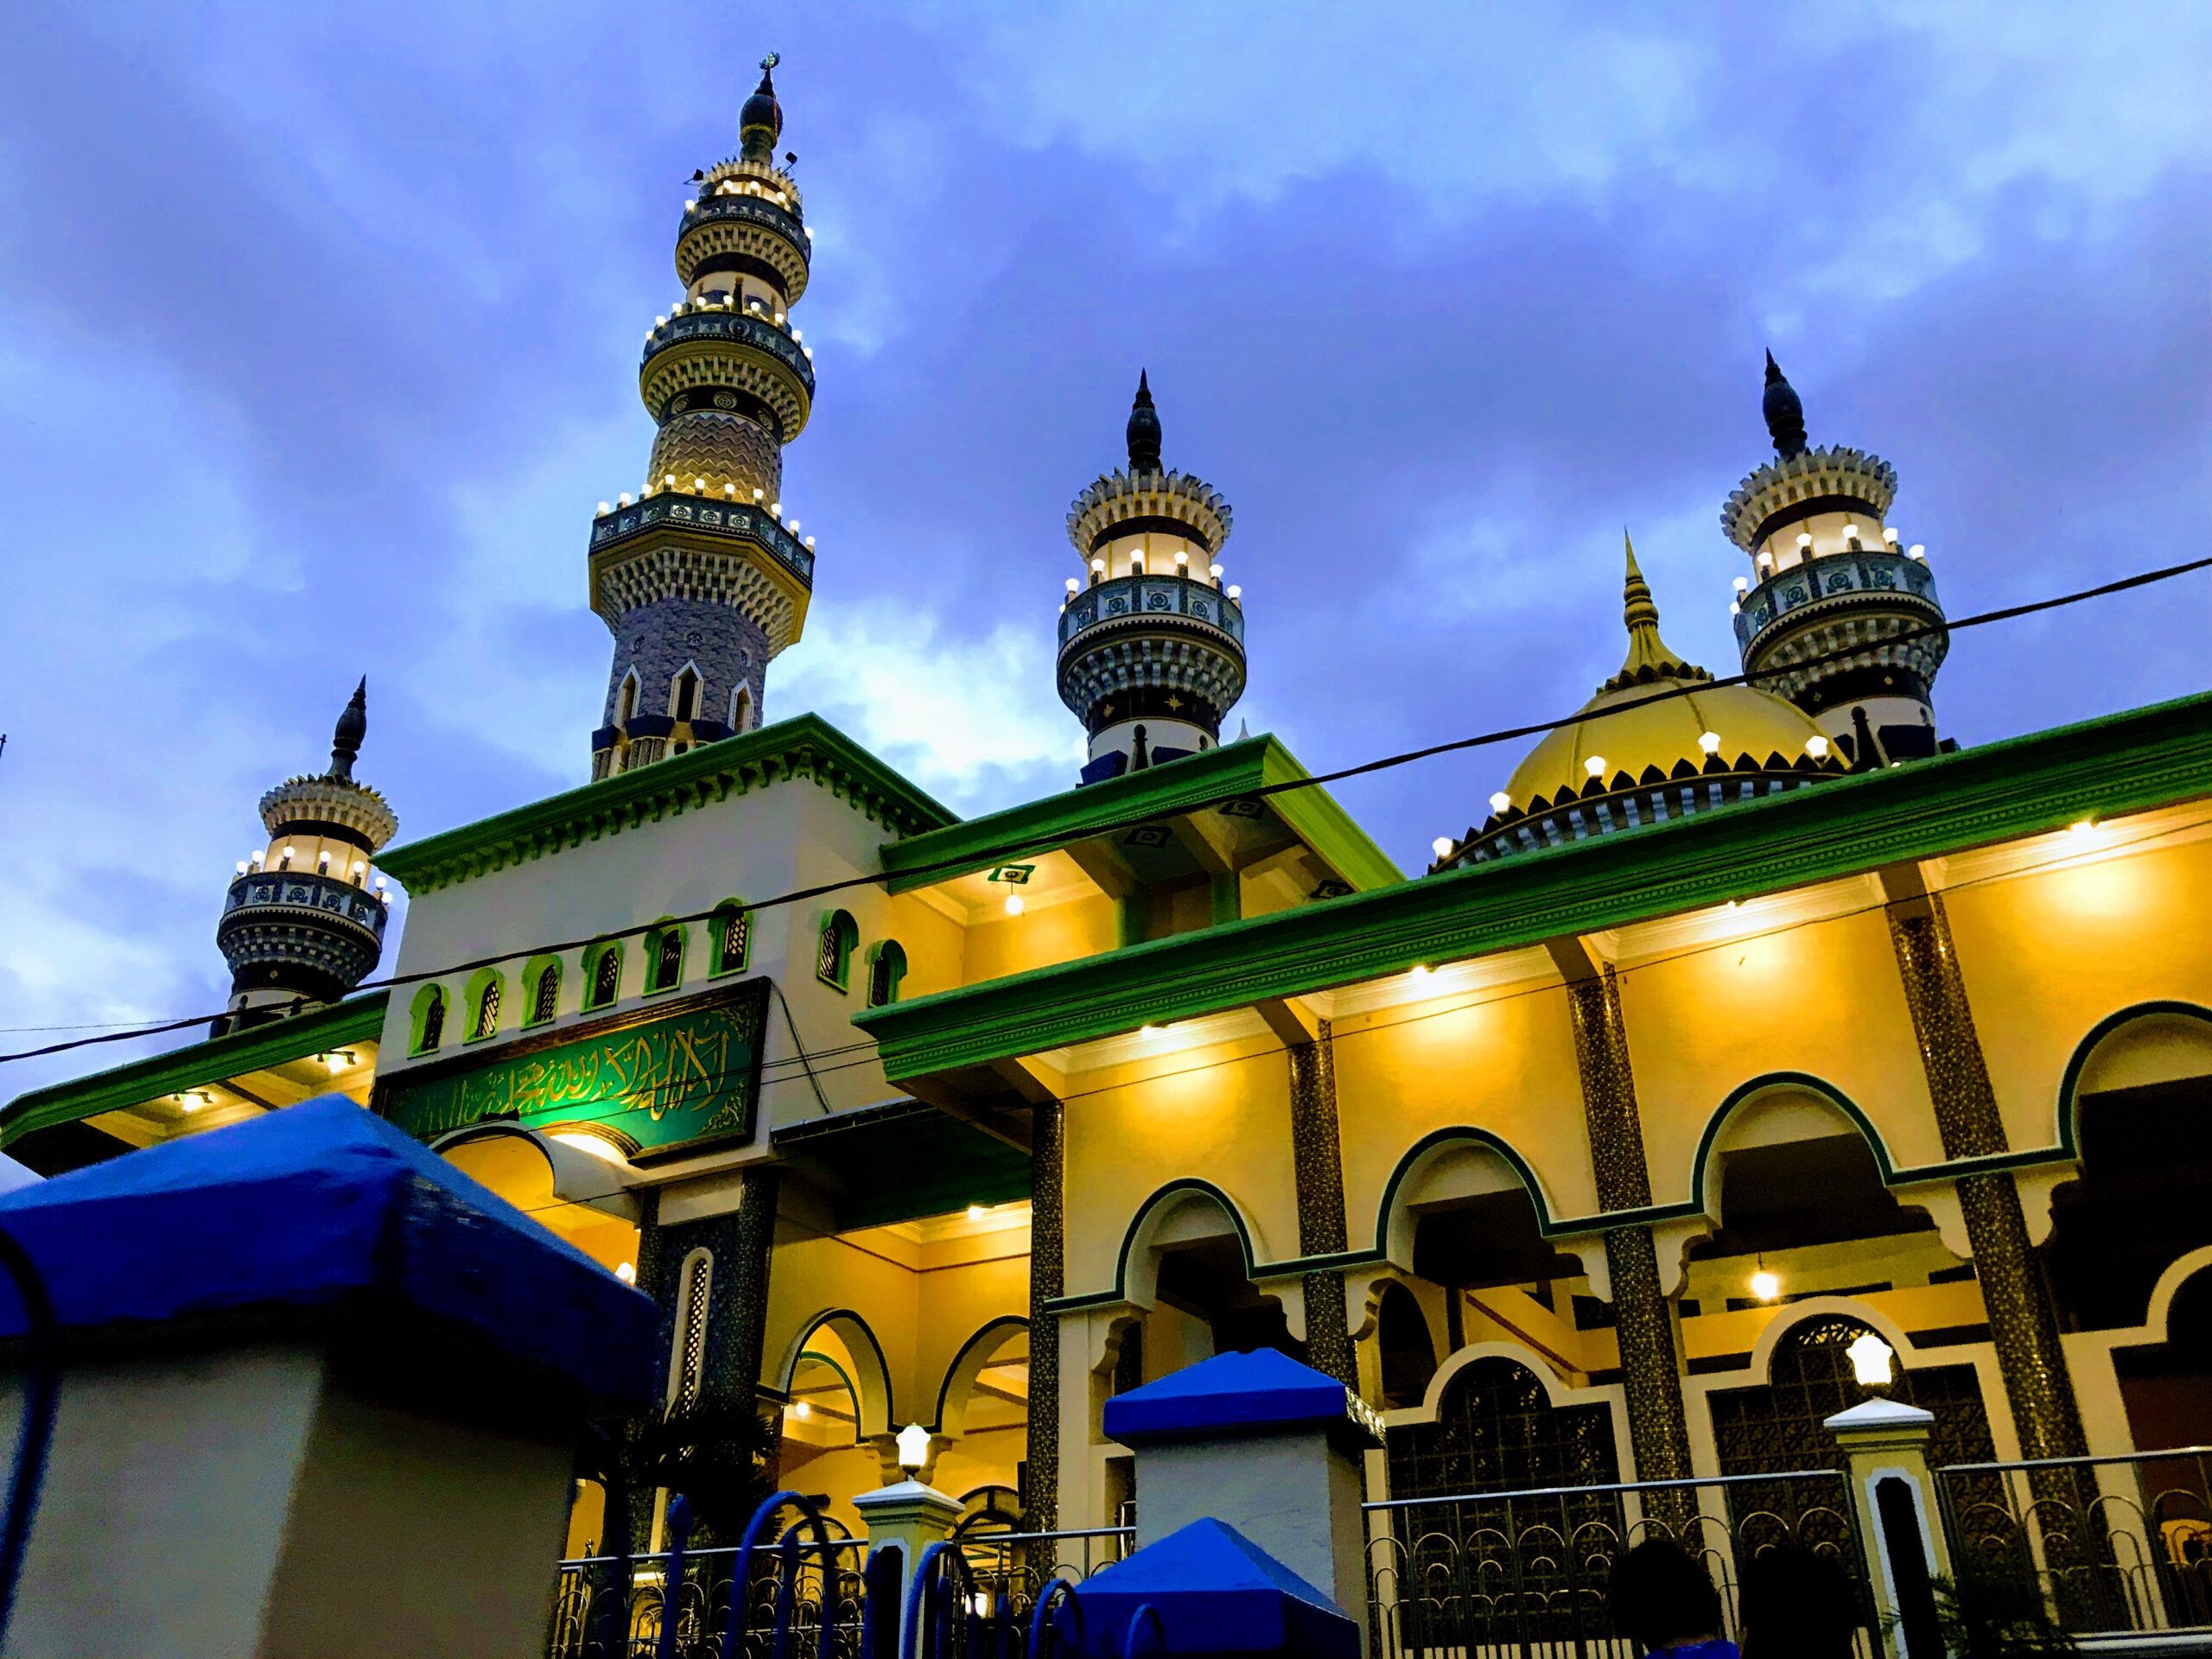 Mosque in Indonesia - prayers for Indonesia